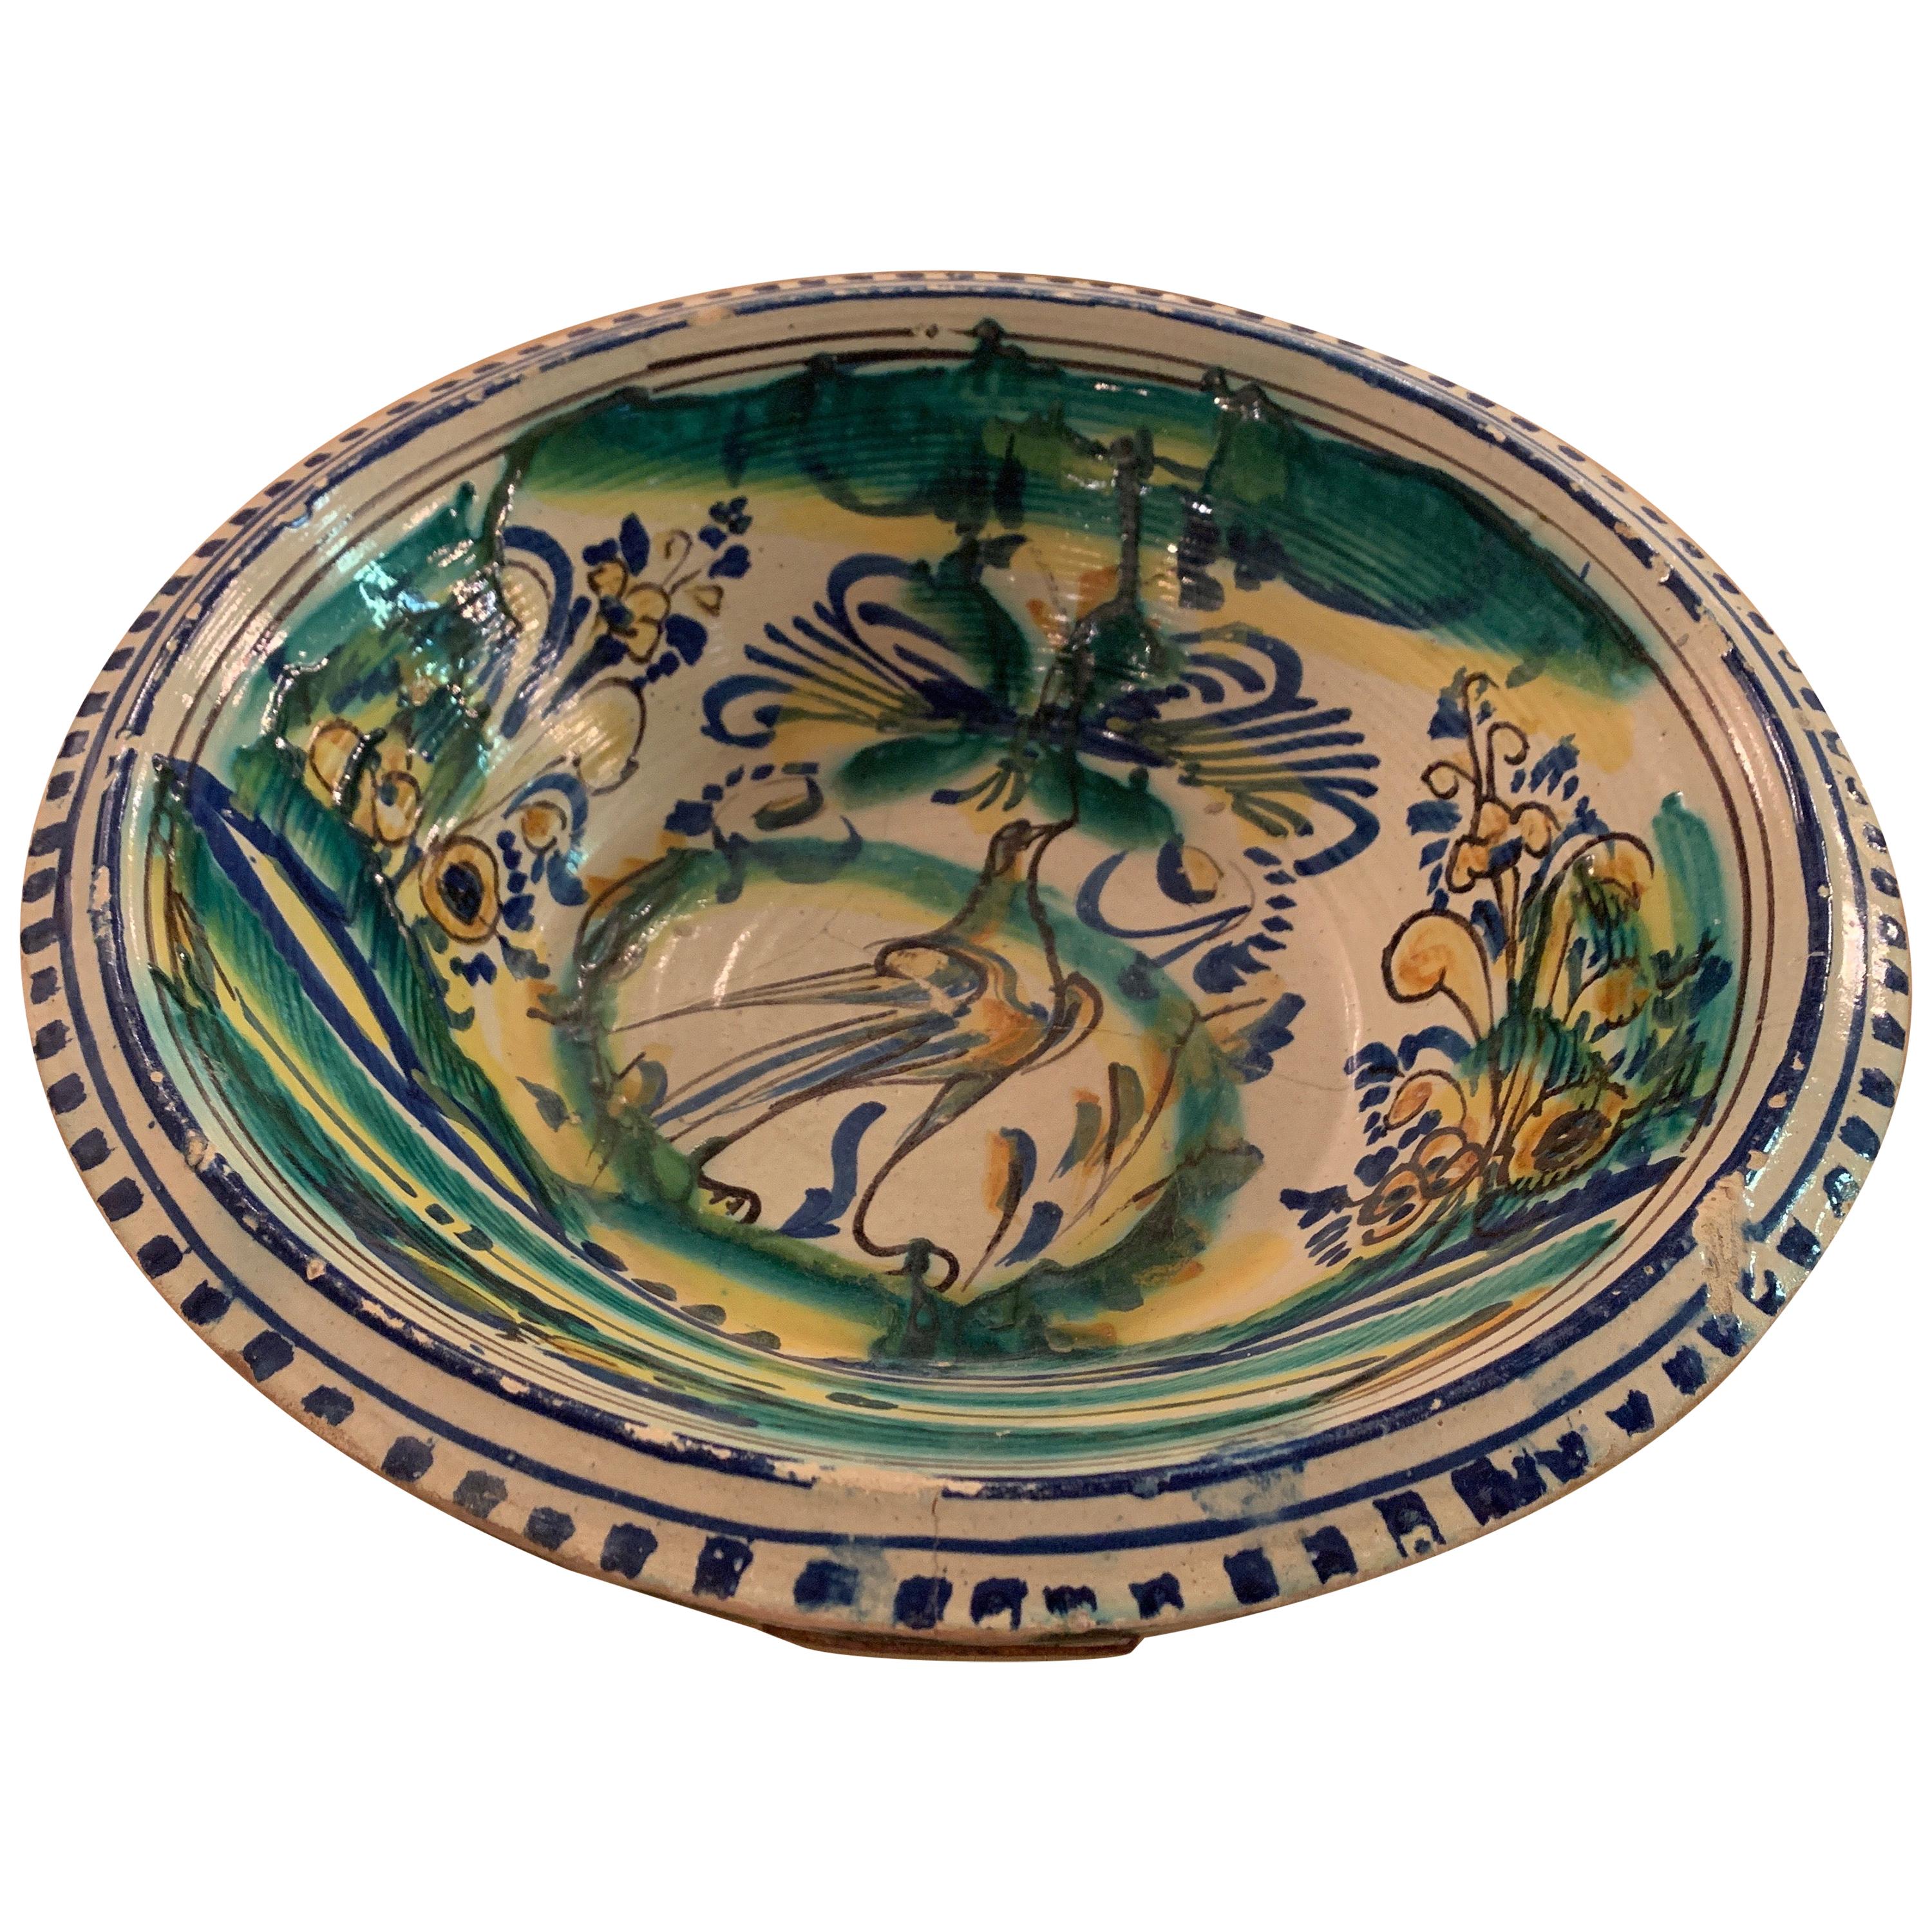 19th Century Spanish Bowl from Andalusia with Bird Motif in Green, Blue, Yellow